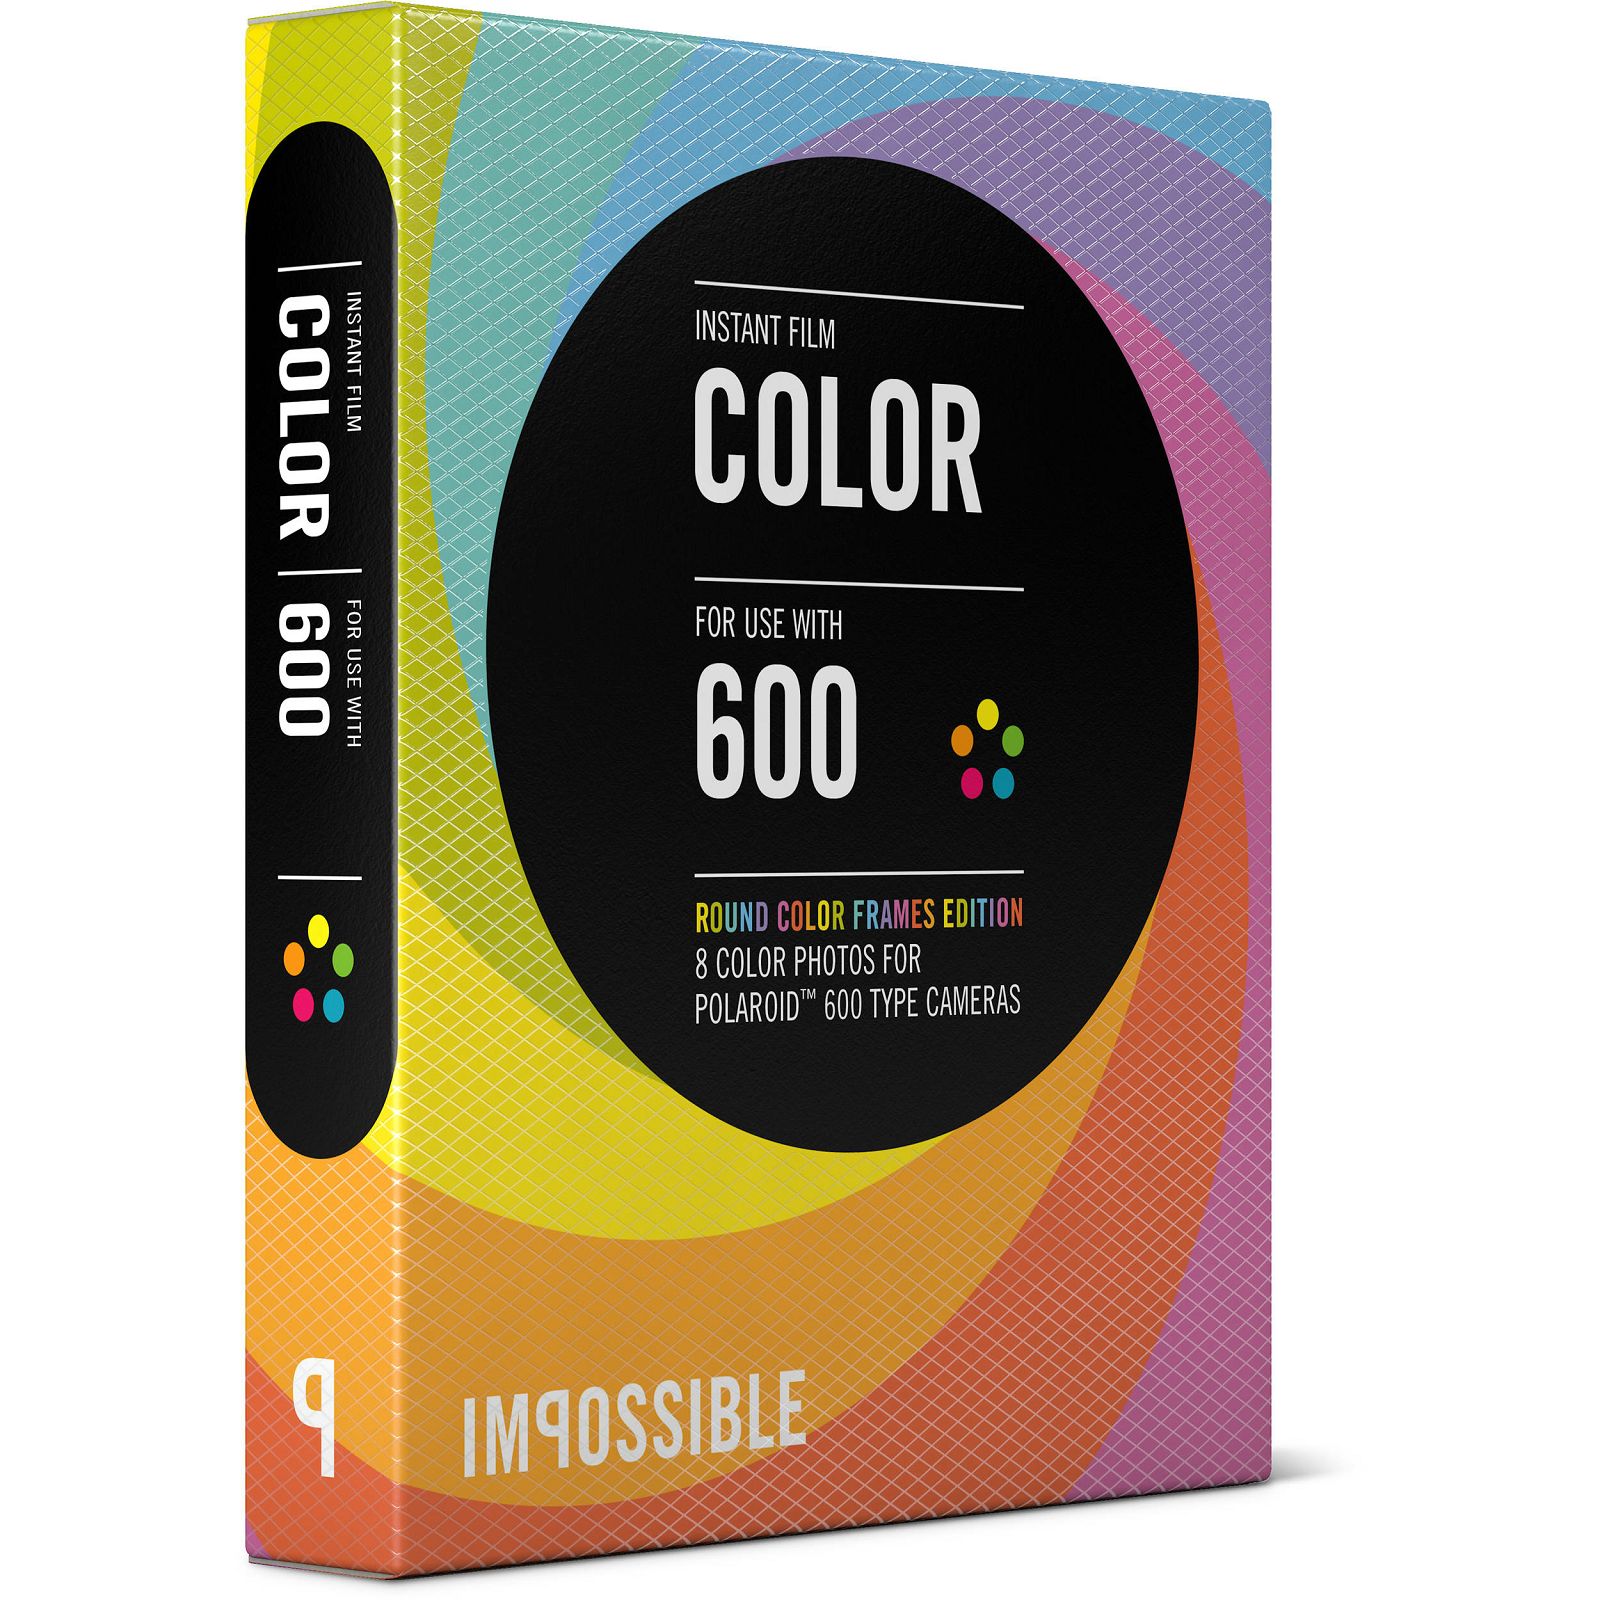 Impossible Color Instant Film for Polaroid 600 Cameras (Color Edition Round Frame, 8 Exposures) 600 Color Round Multicolor Frame (4154)